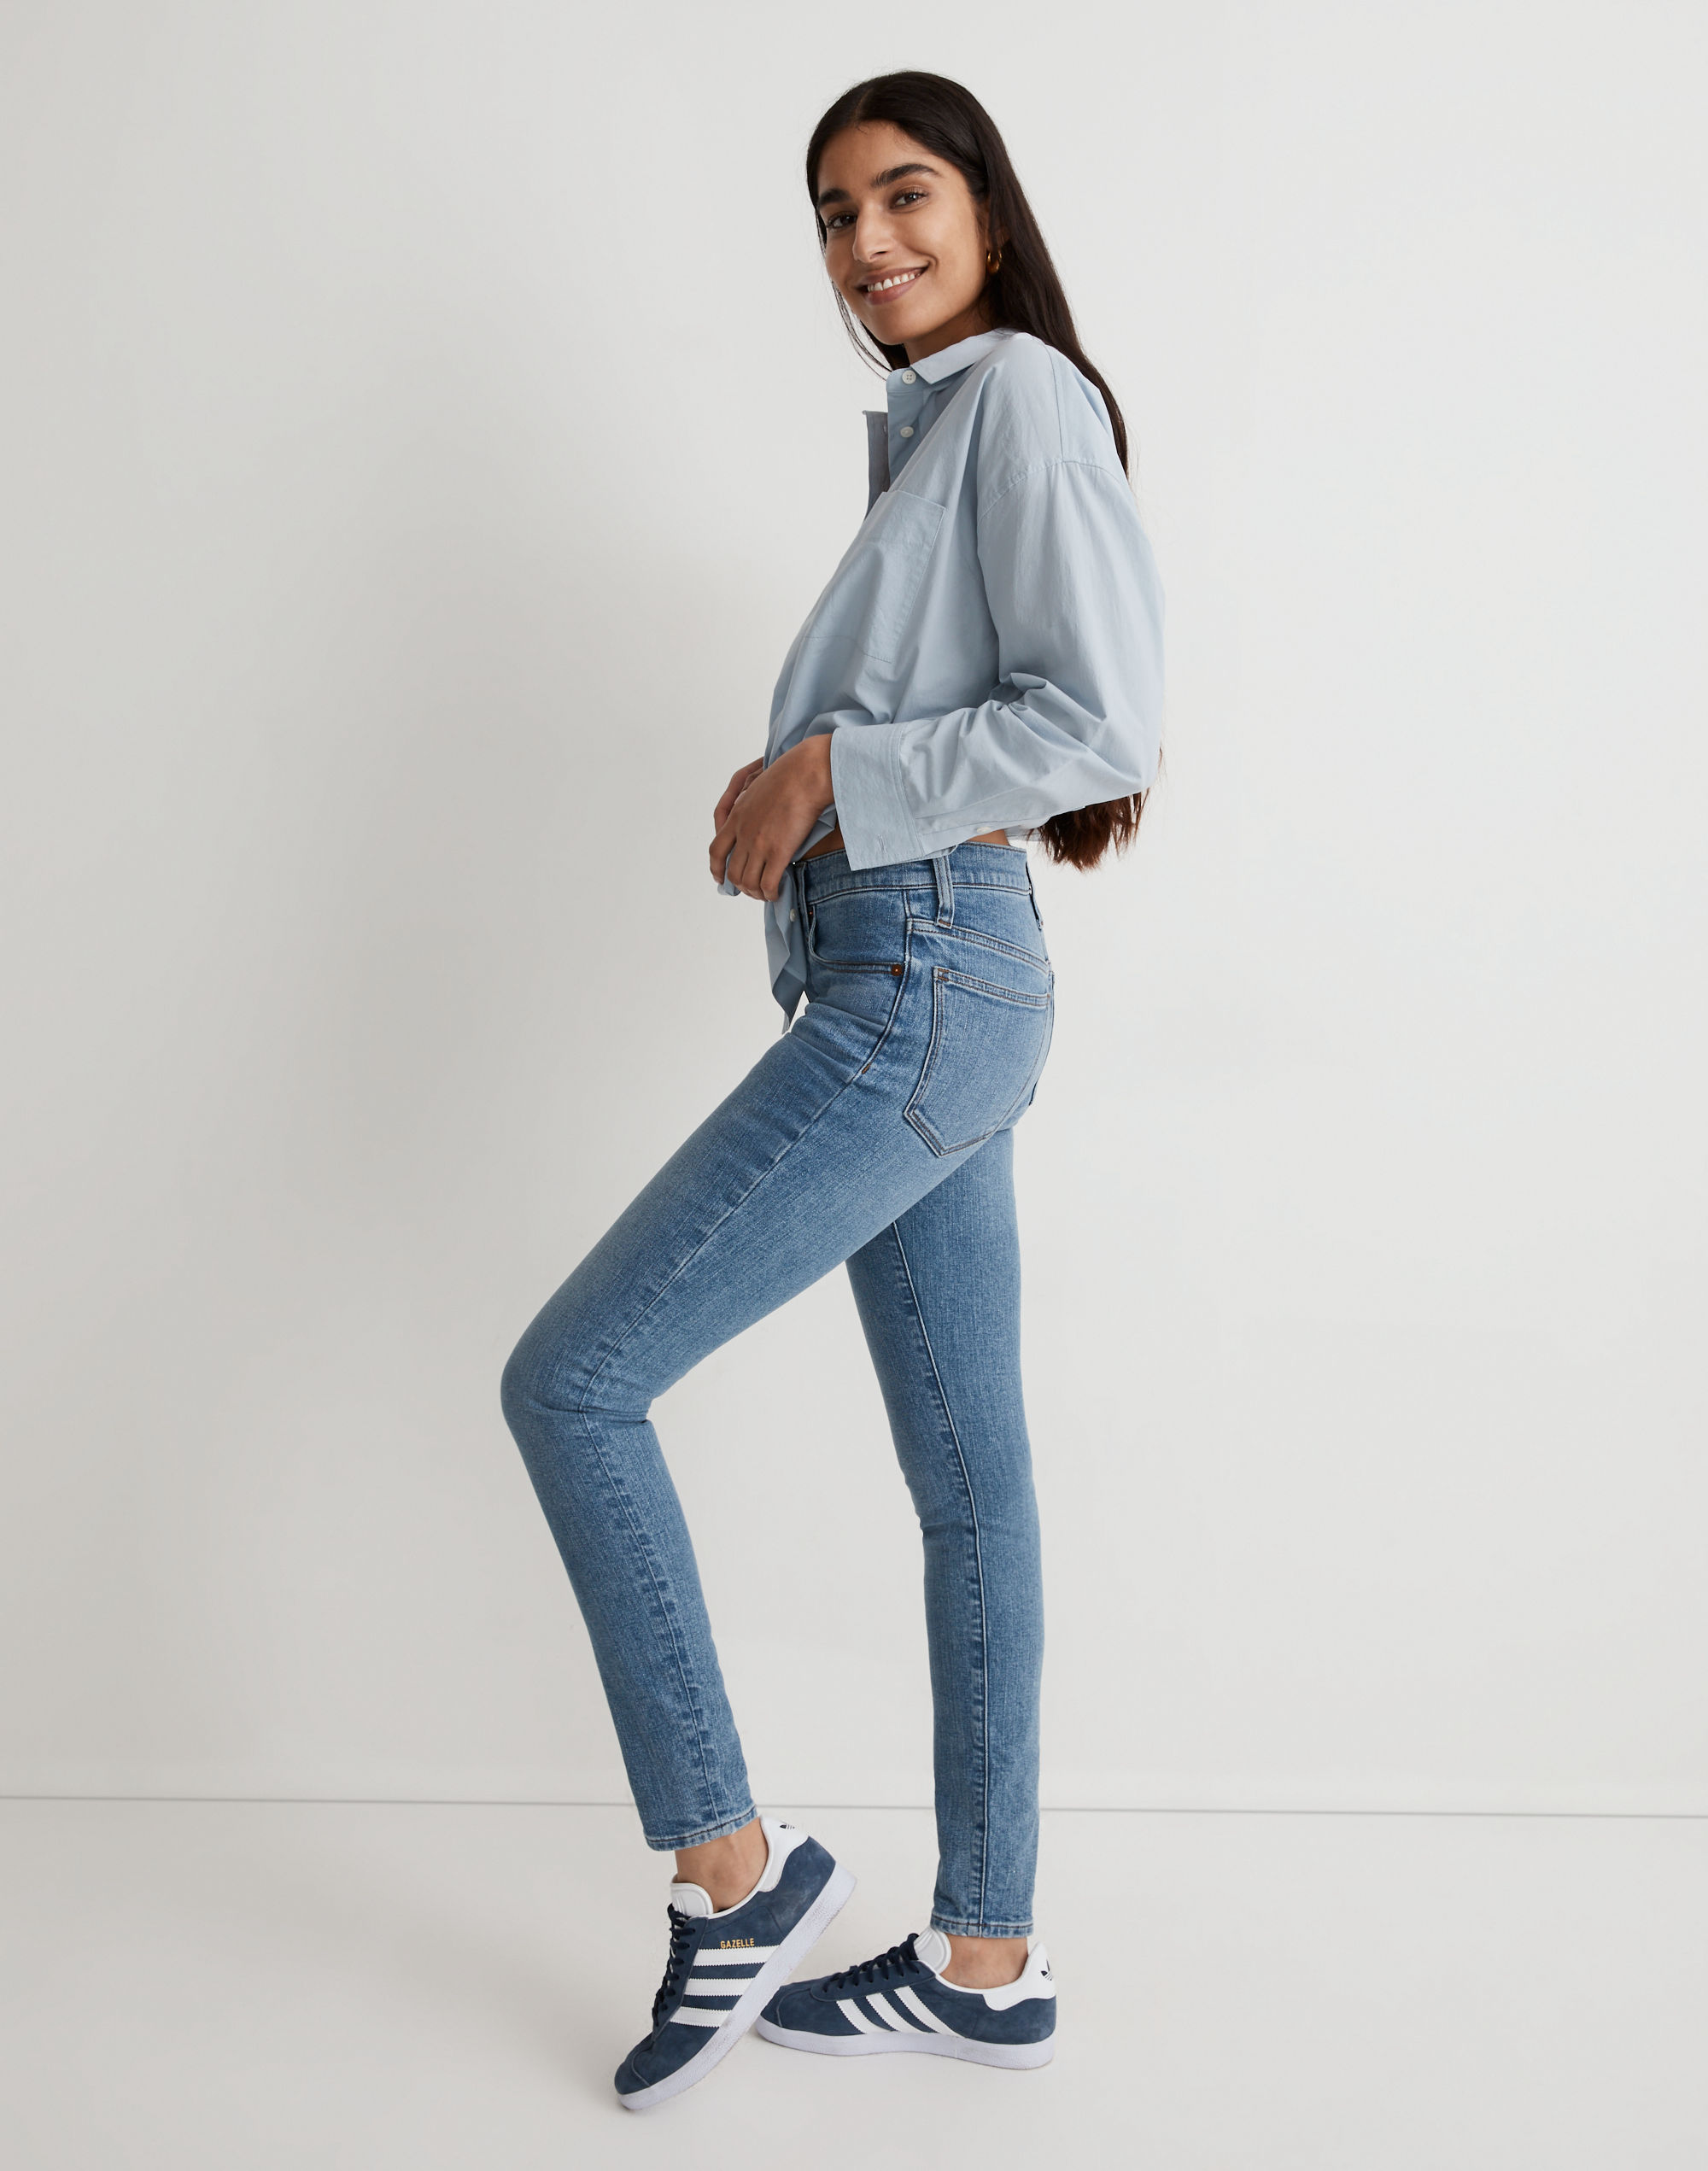 9" Mid-Rise Skinny Jeans in Cloverdale Wash